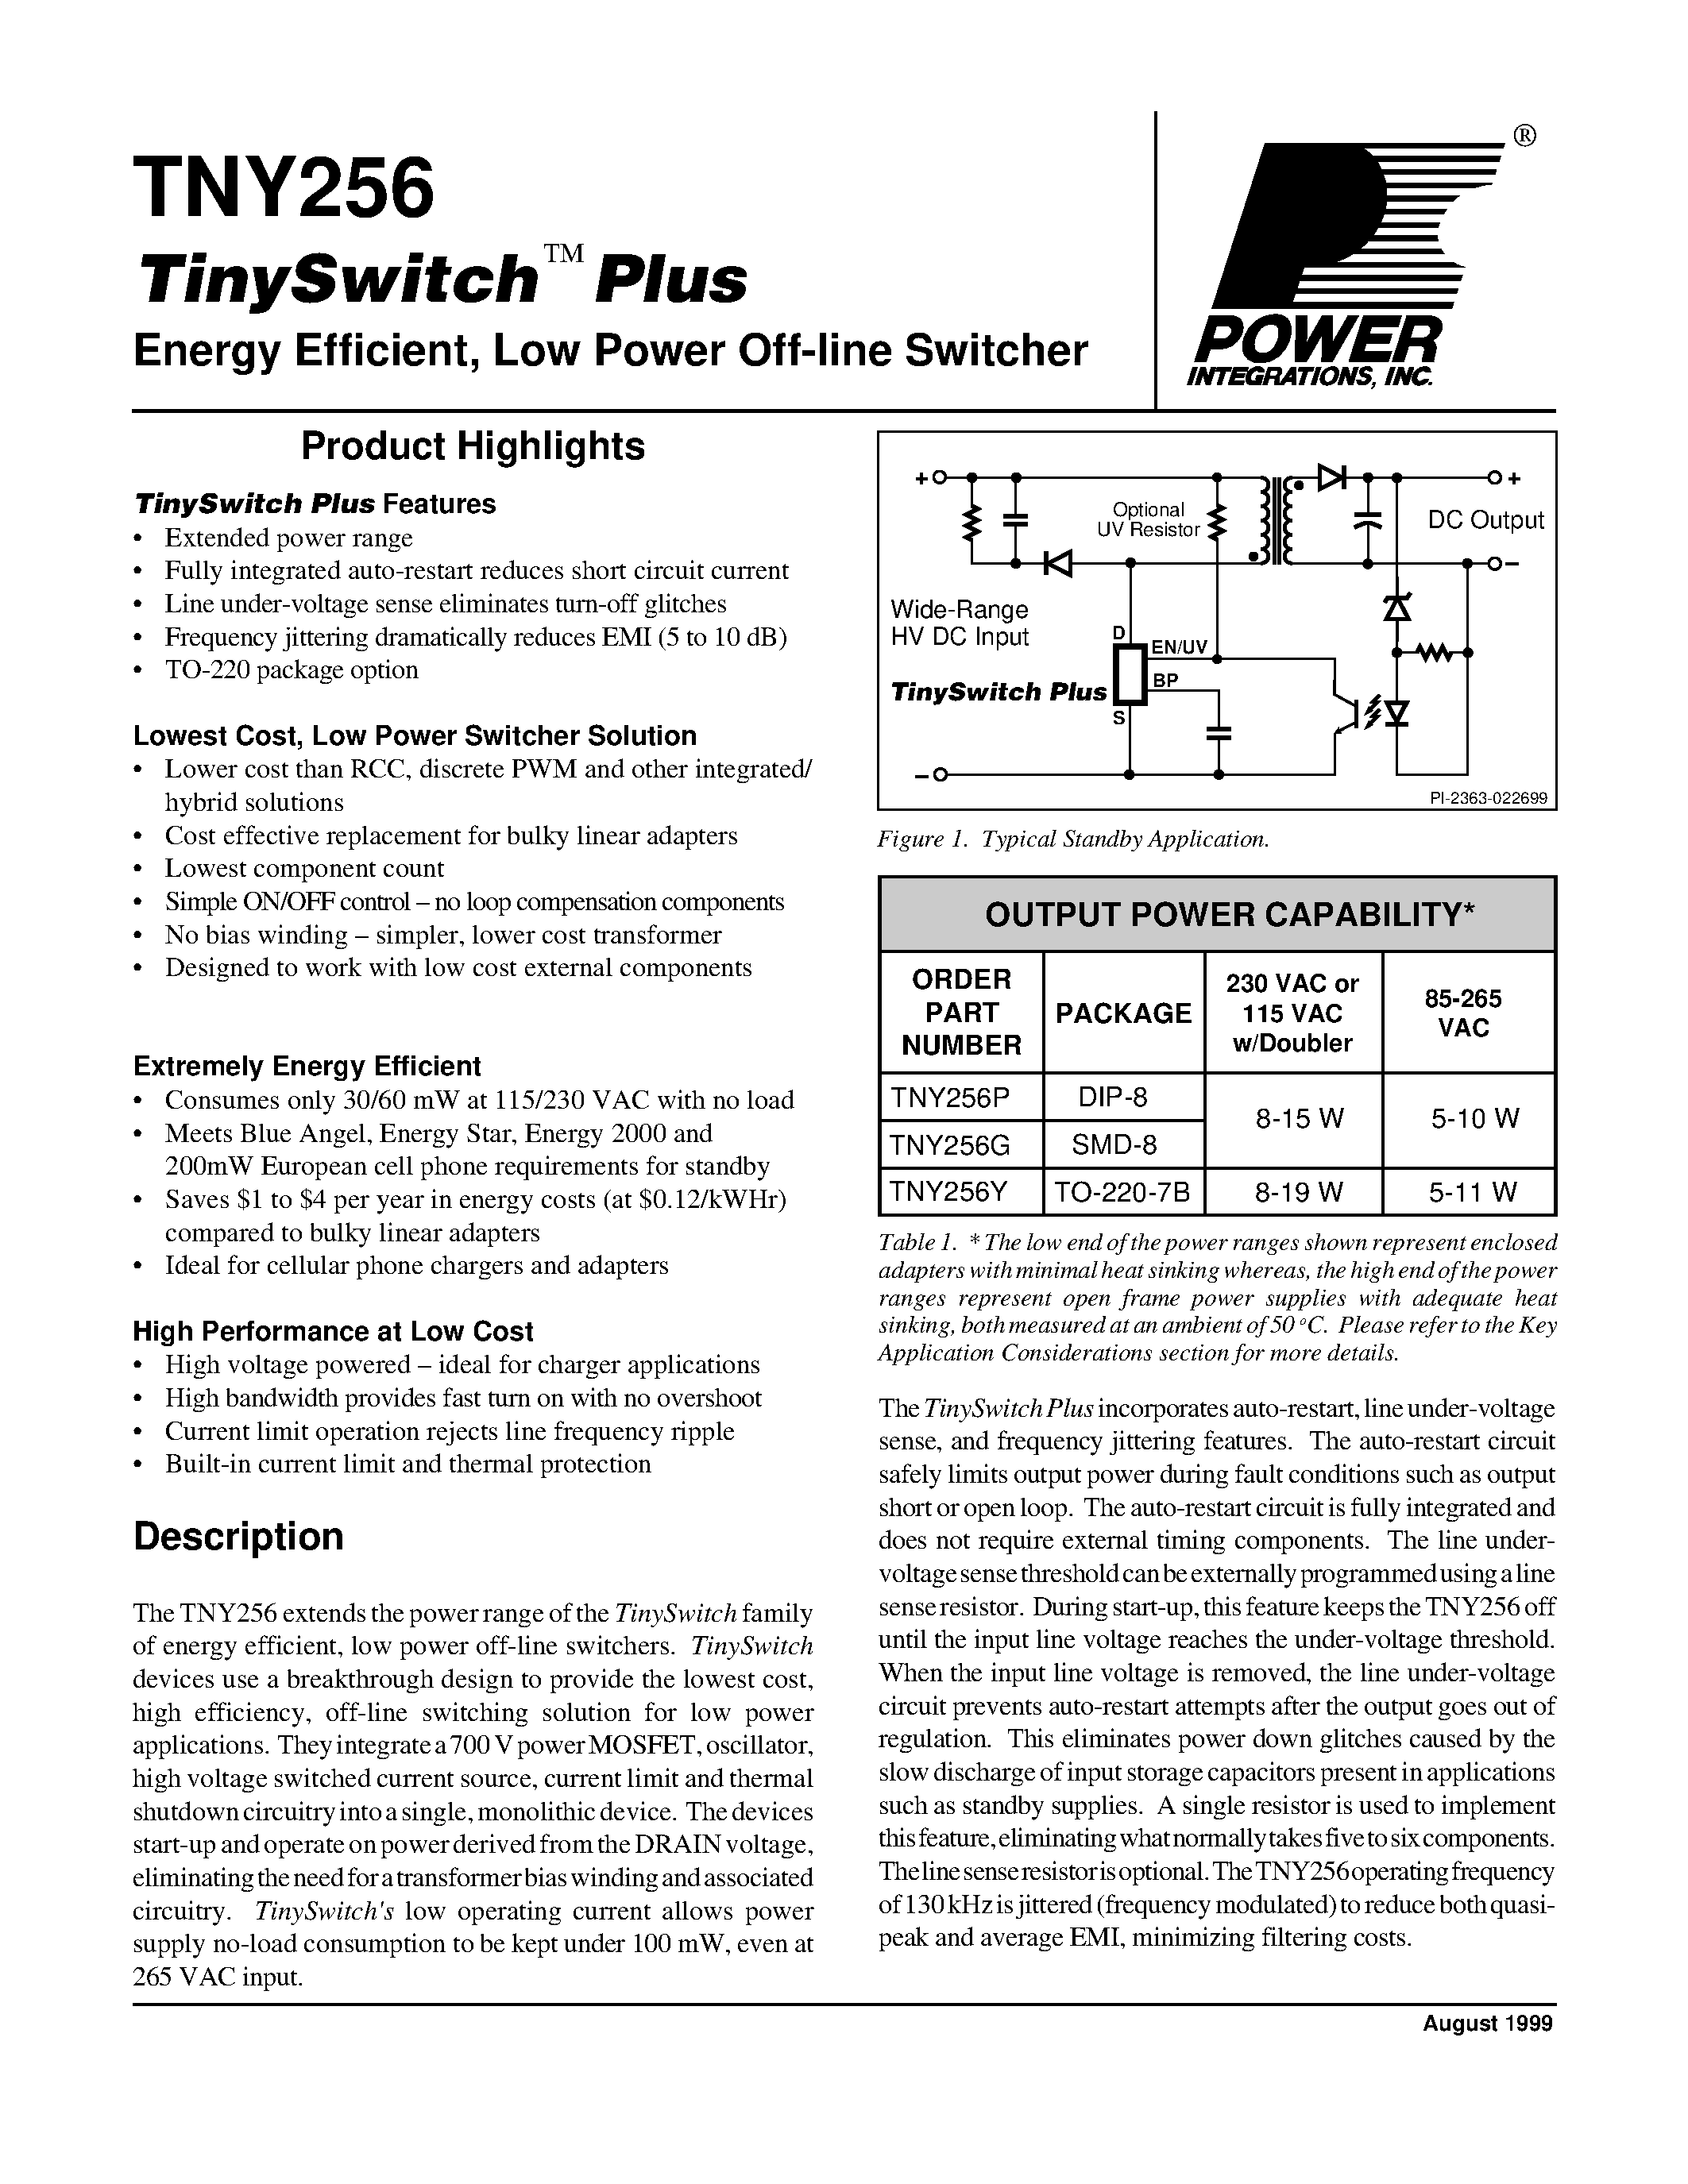 Datasheet TYN256P - Energy Efficient/ Low Power Off-line Switcher page 1